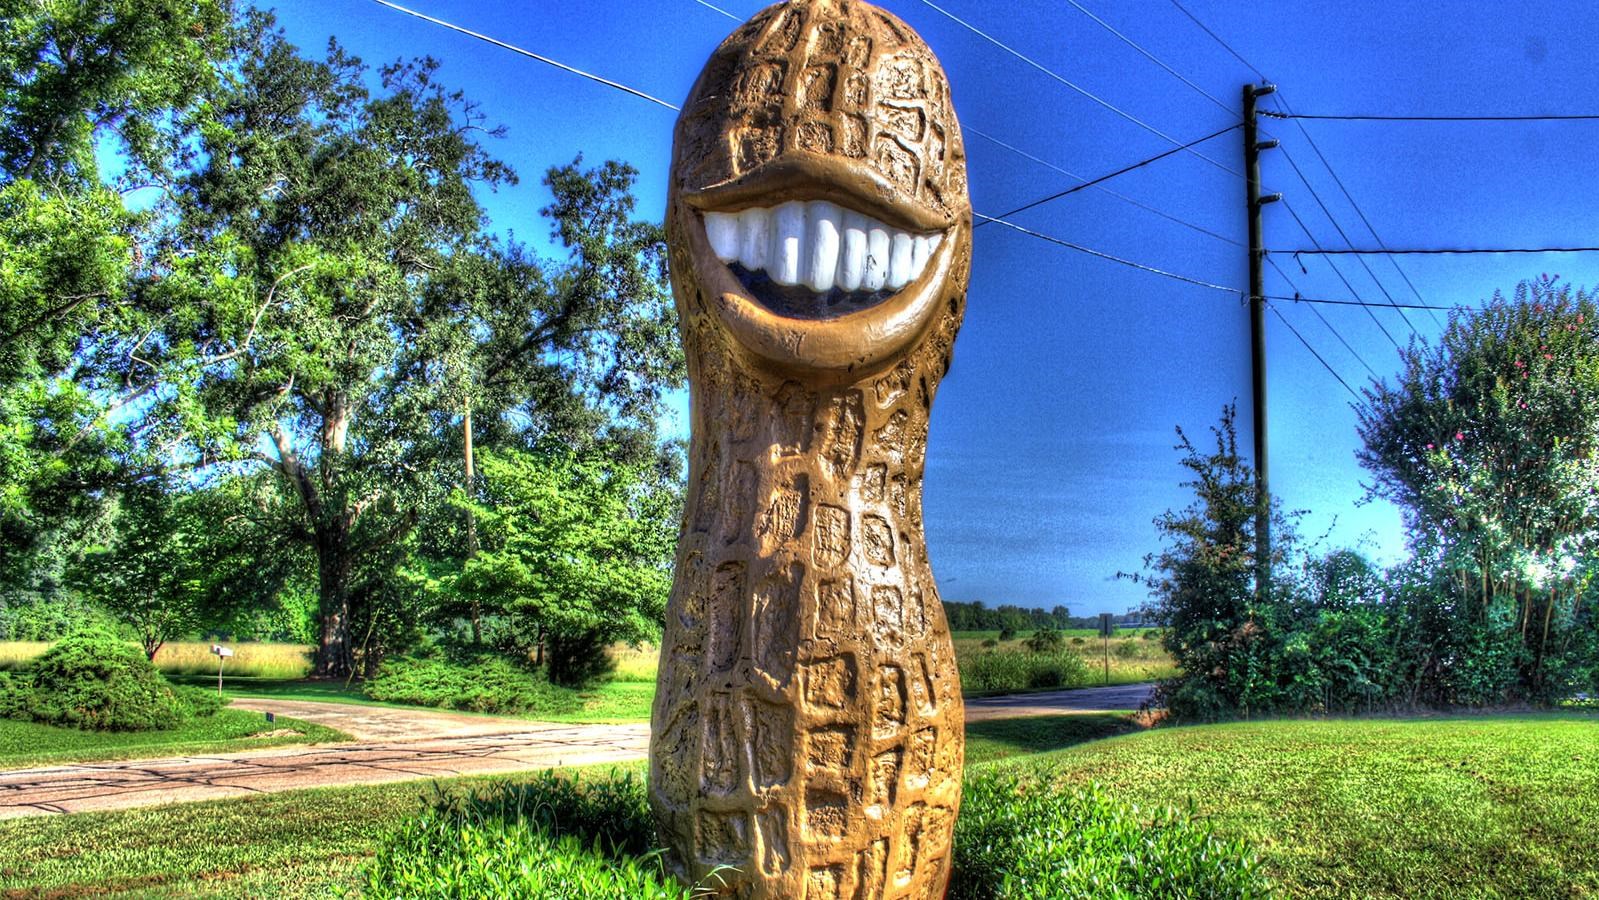 a 13 foot tall smiling peanut used in the 1976 Presidential Campaign by Jimmy Carter.